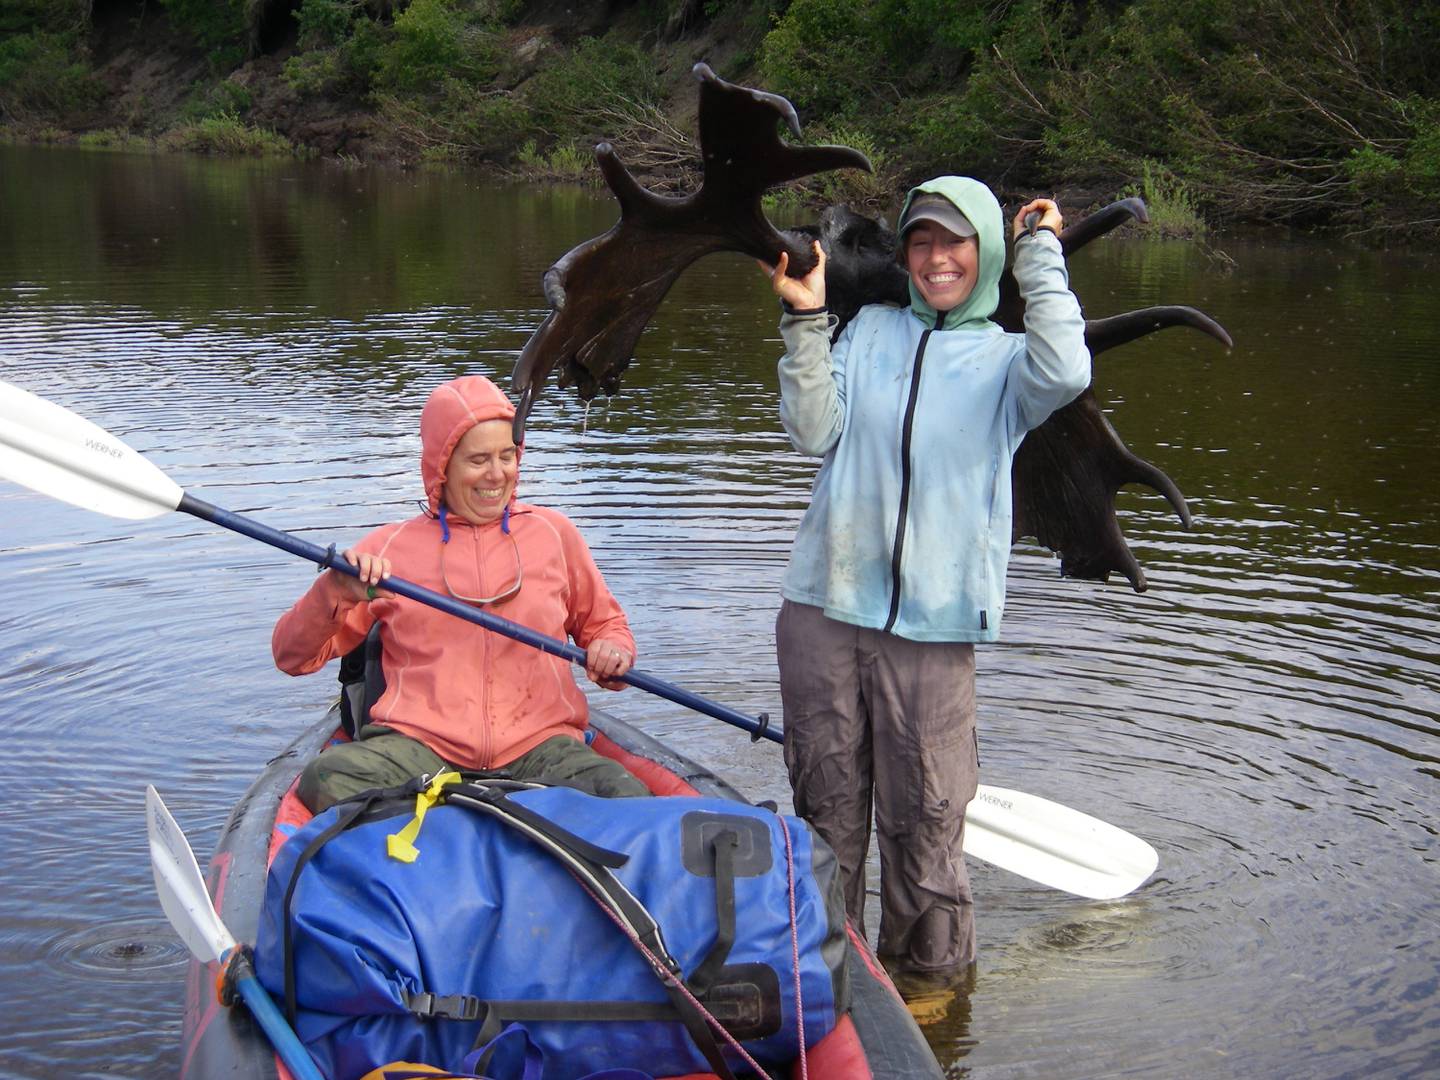 Molly Yazwinski holds a 3,000-year-old moose skull with antlers still attached, found in a river on Alaska’s North Slope. Her aunt, Pam Groves, steadies an inflatable canoe.